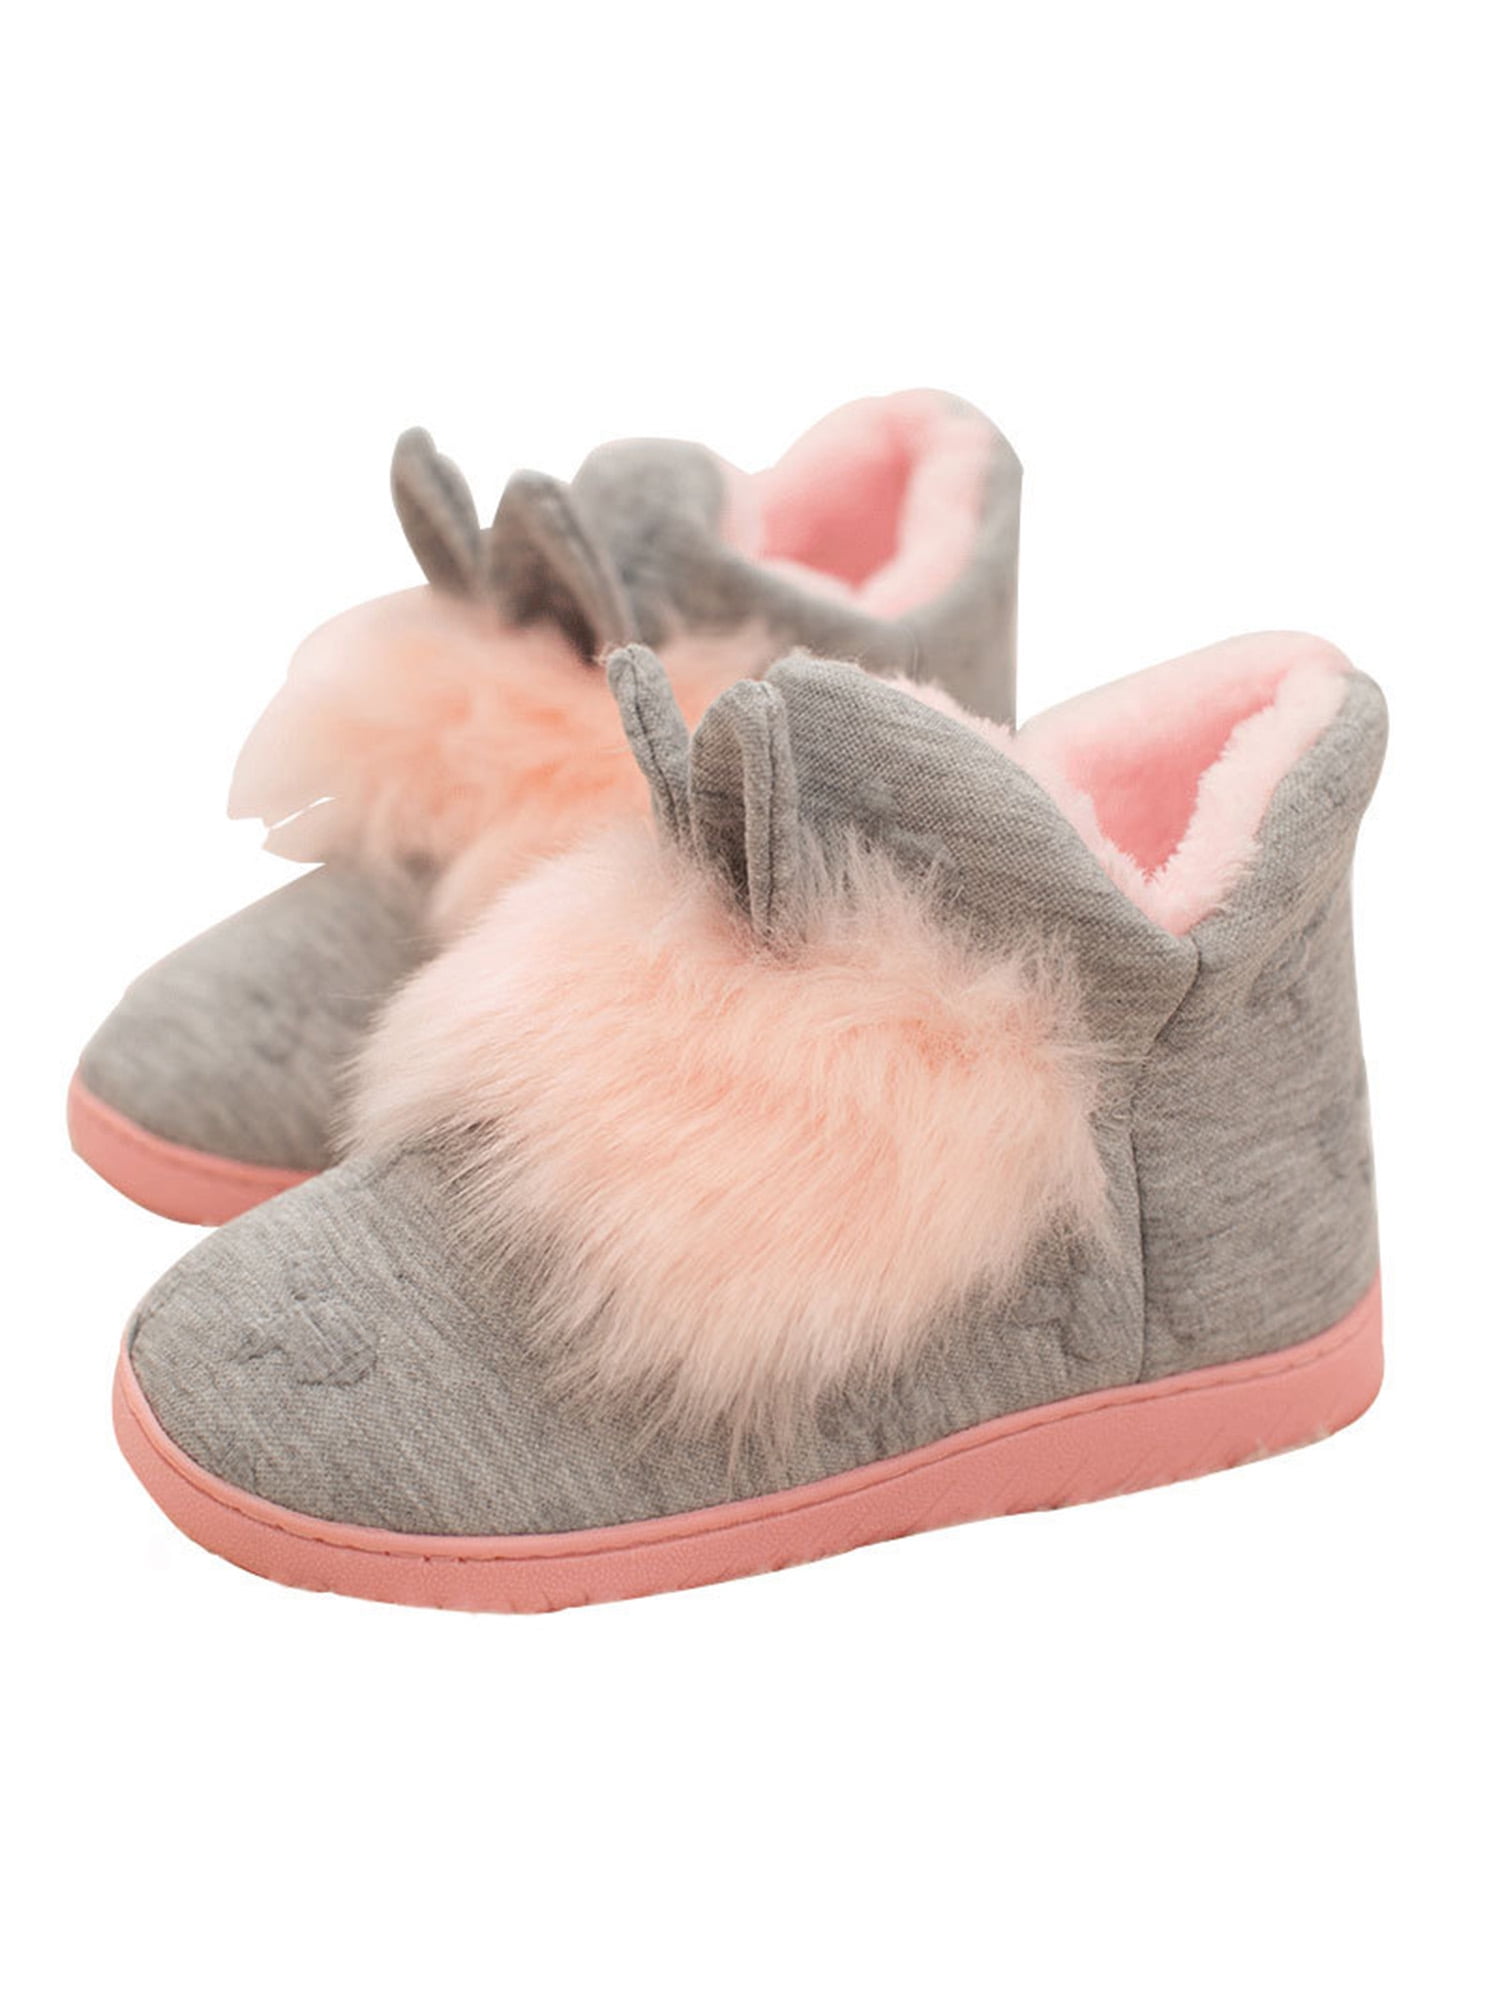 Ladies Winter Warm Womens Girls Faux Fur Bunny Rabbit Slippers Mules Shoes Sizes 